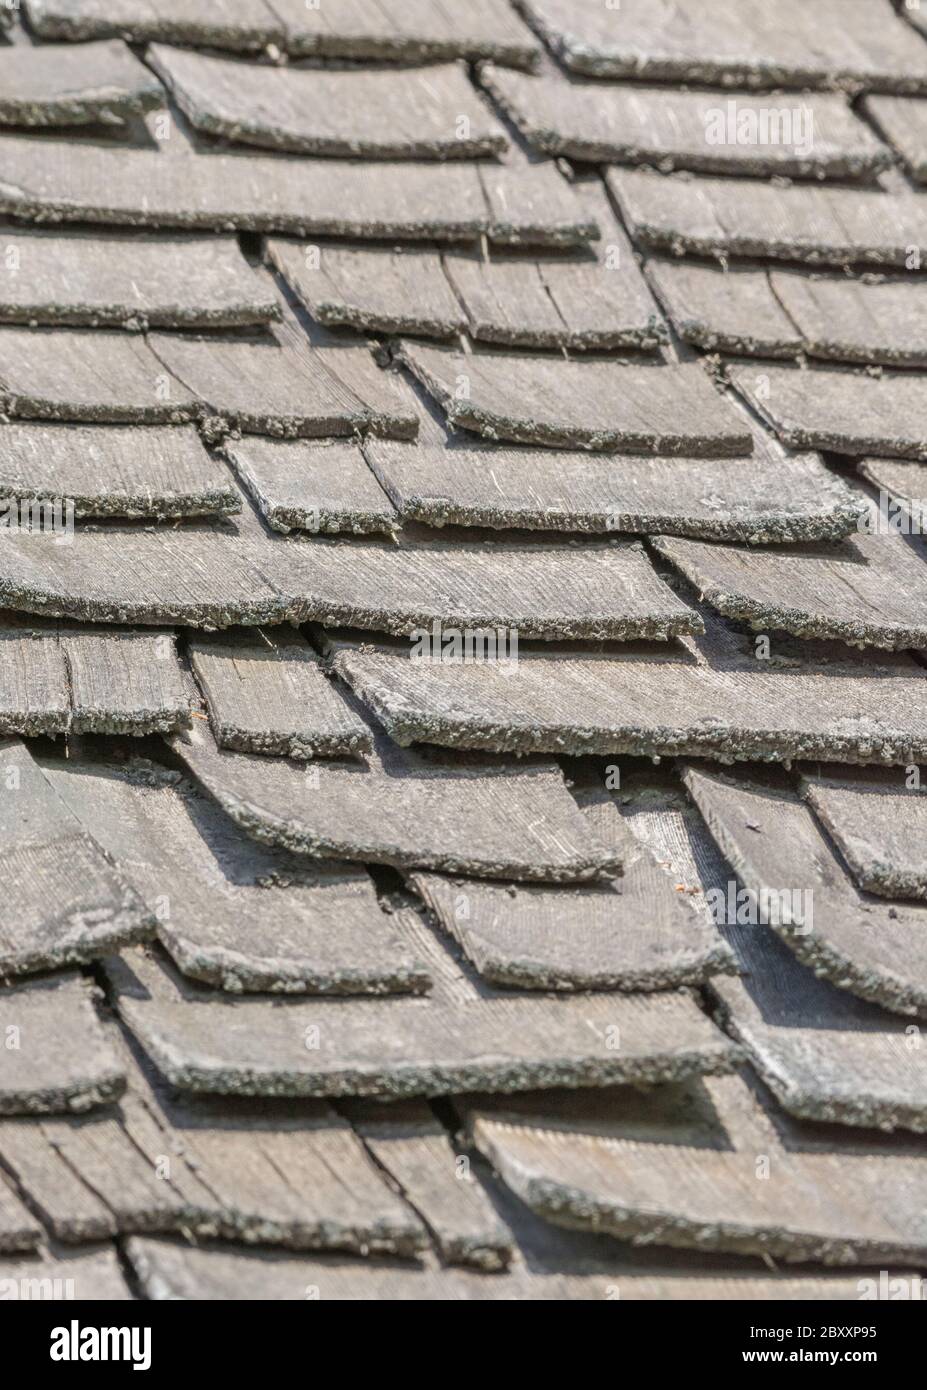 Wind and rain damaged old wood shingle / wood shake roof in poor repair, poor condition, & needs replacing. Idiom got a slate loose, & mental illness. Stock Photo